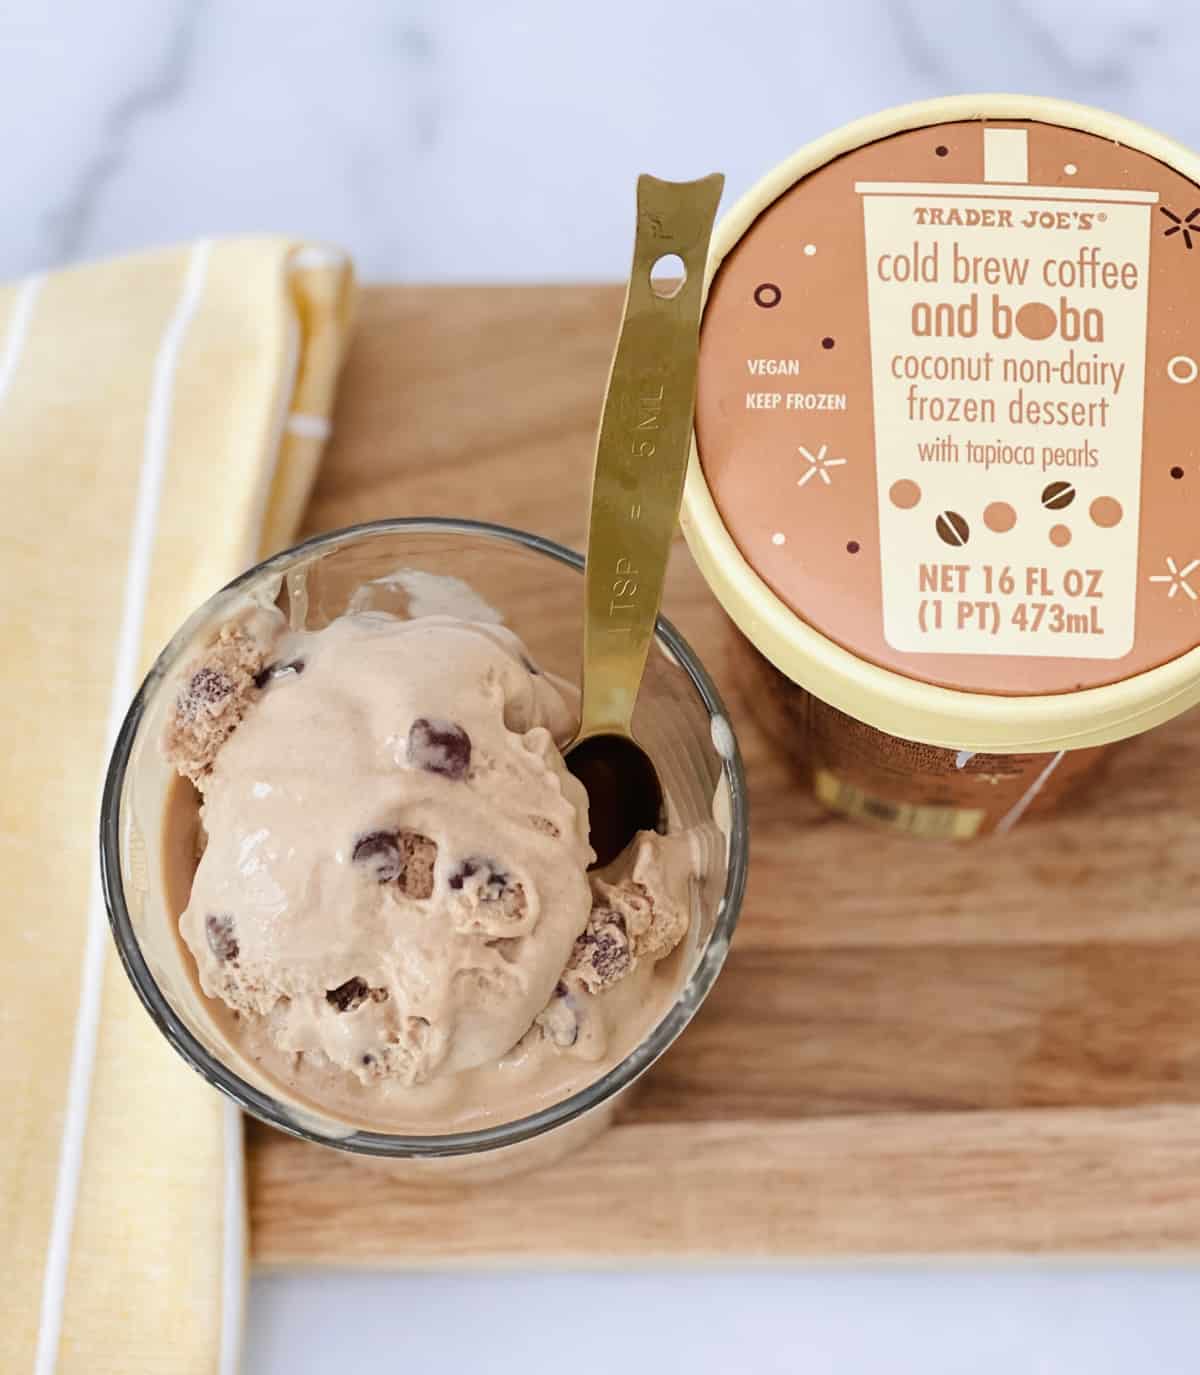 We Tried Trader Joe’s Cold Brew Coffee Boba Ice Cream – Here’s What It Tastes Like